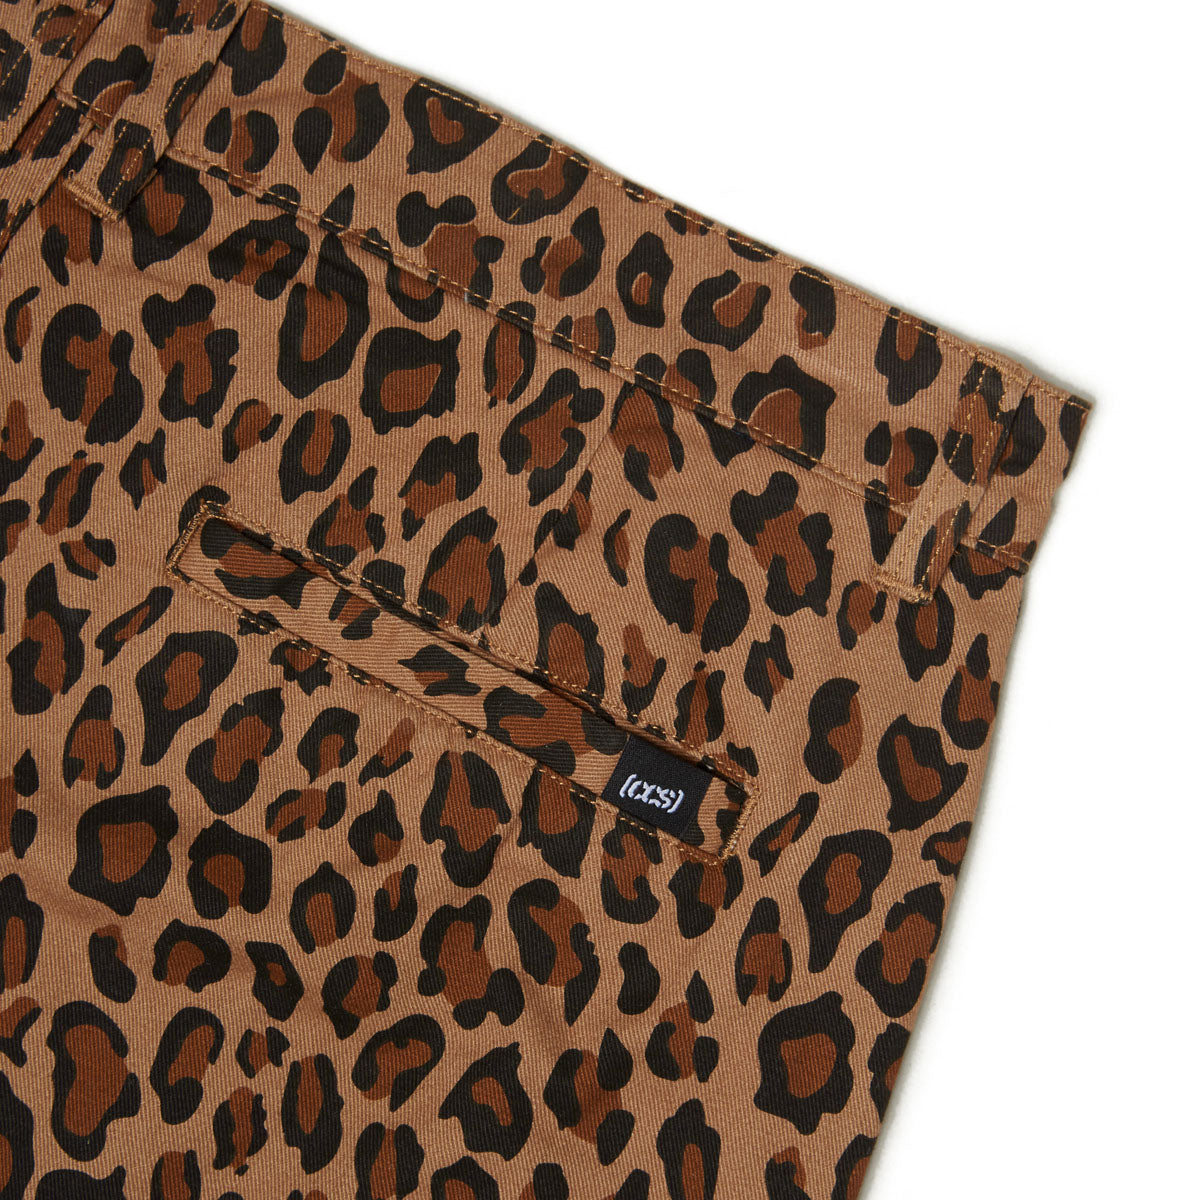 CCS Original Relaxed Chino Pants - Leopard image 6